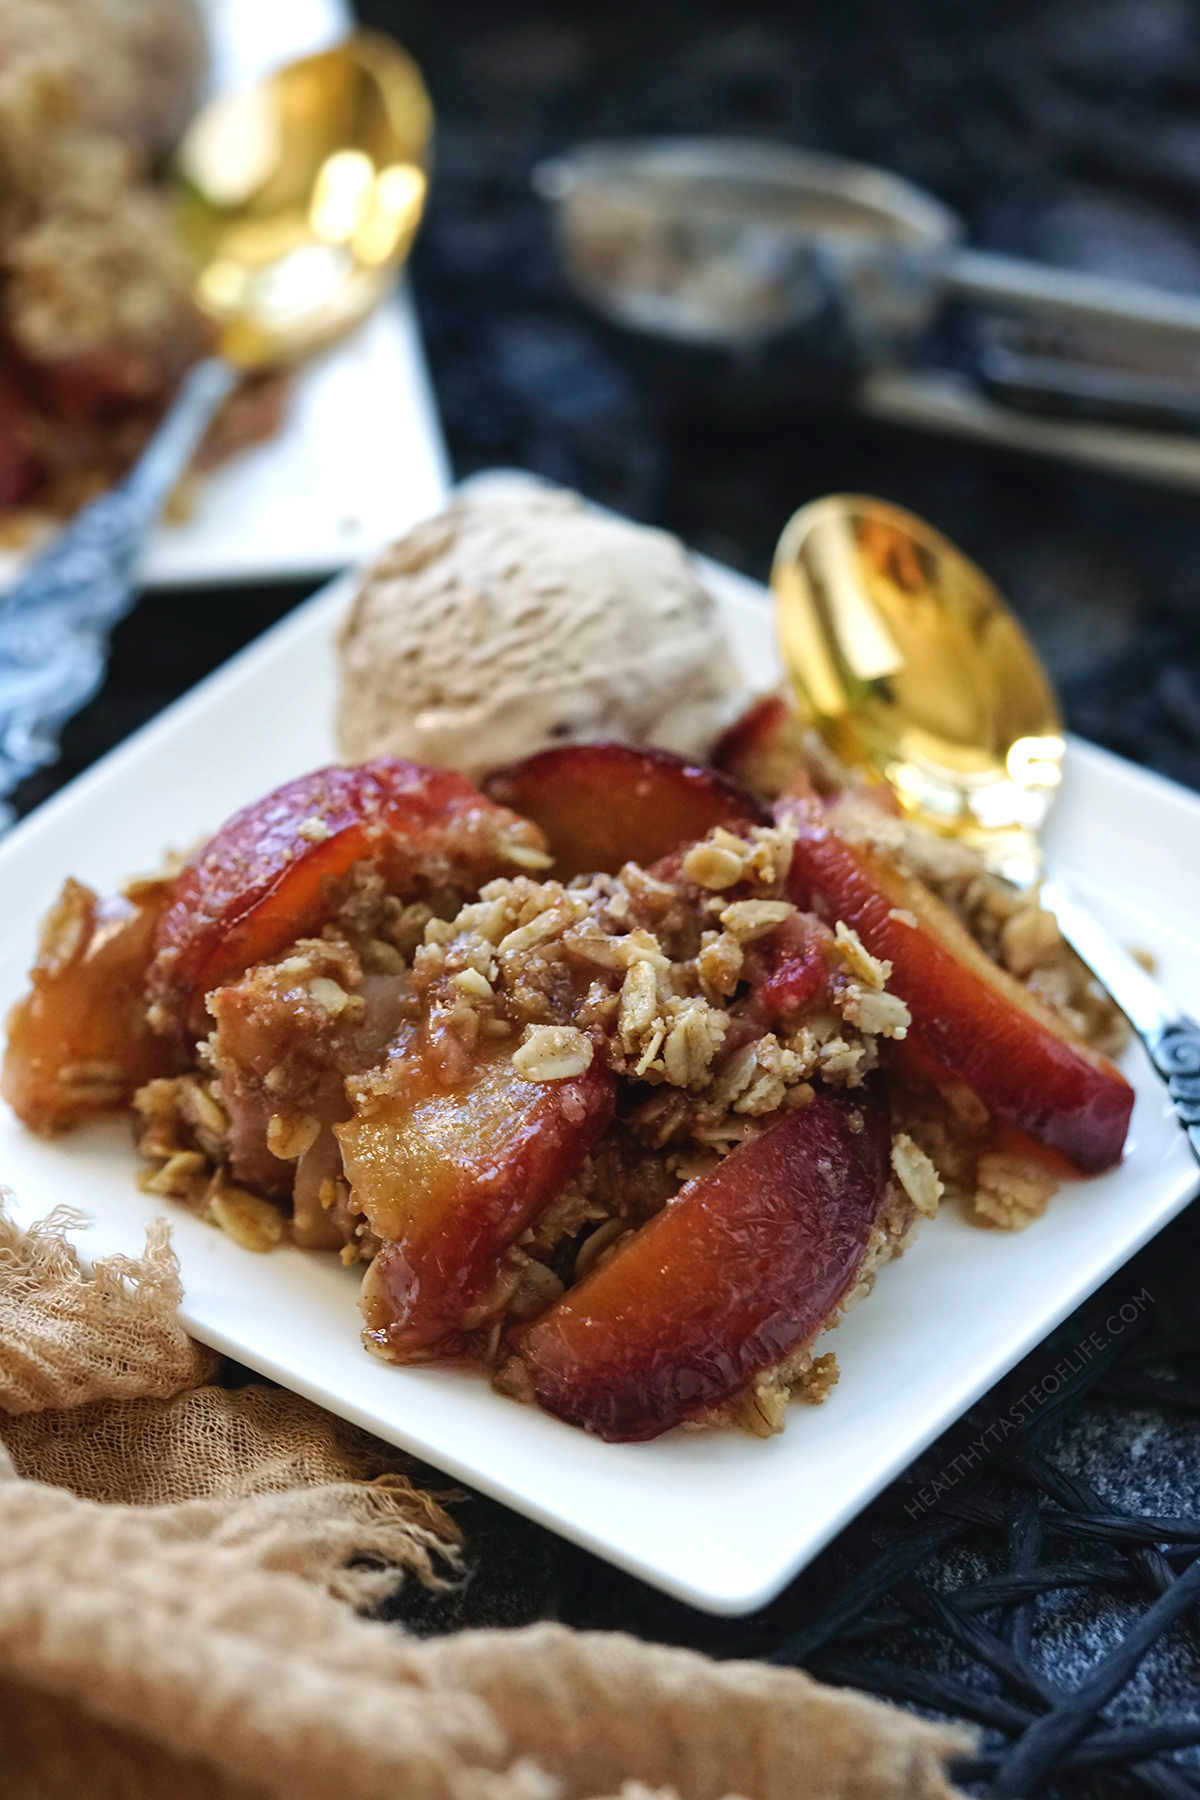 Apple plum crumble served with a scoop of ice cream.